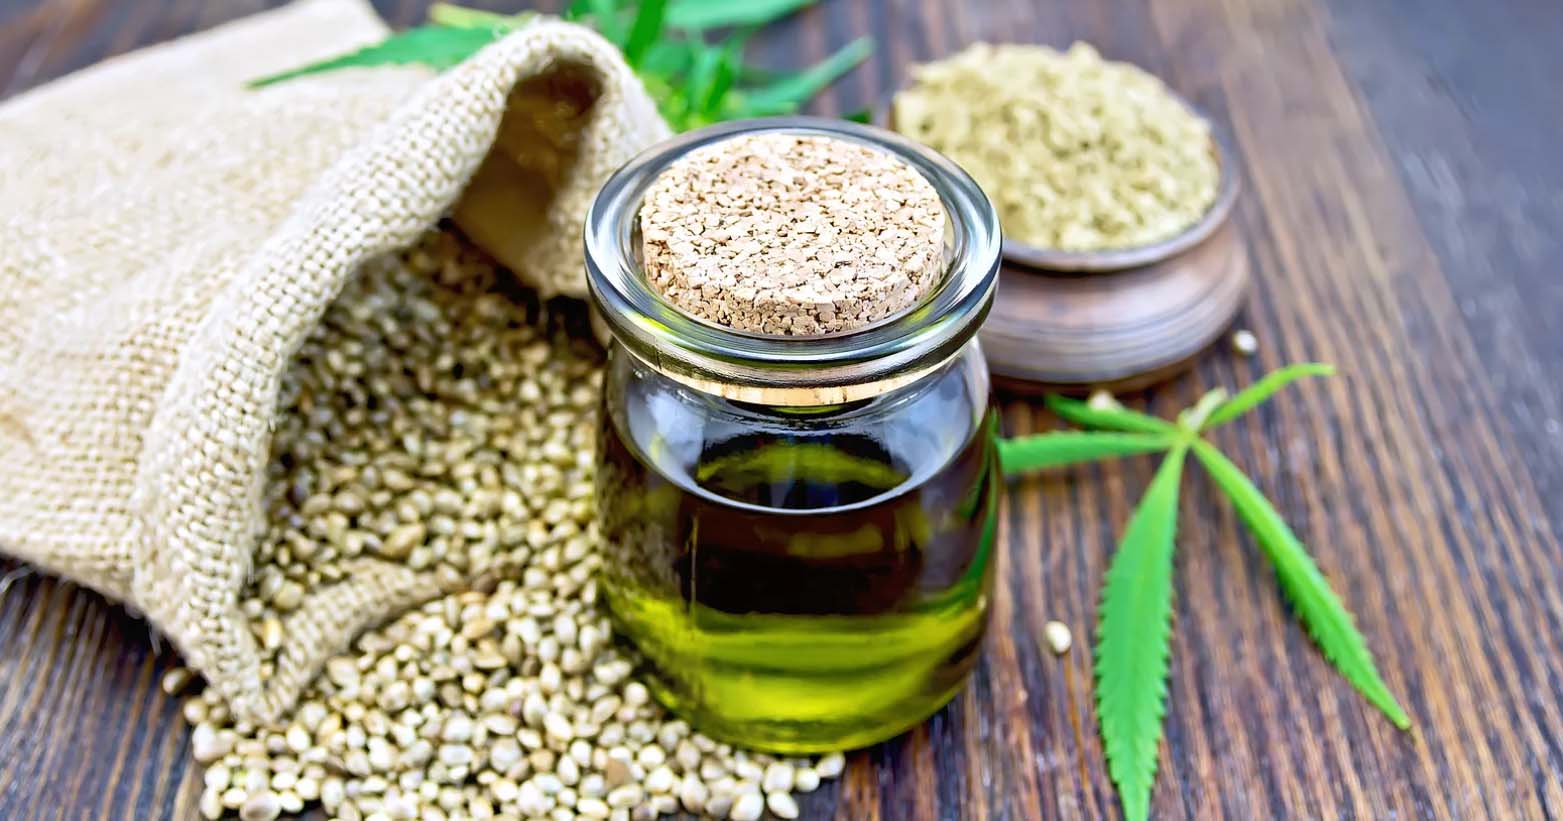 CBD TINCTURES OR SOFTGELS - WHICH IS RIGHT FOR YOU?